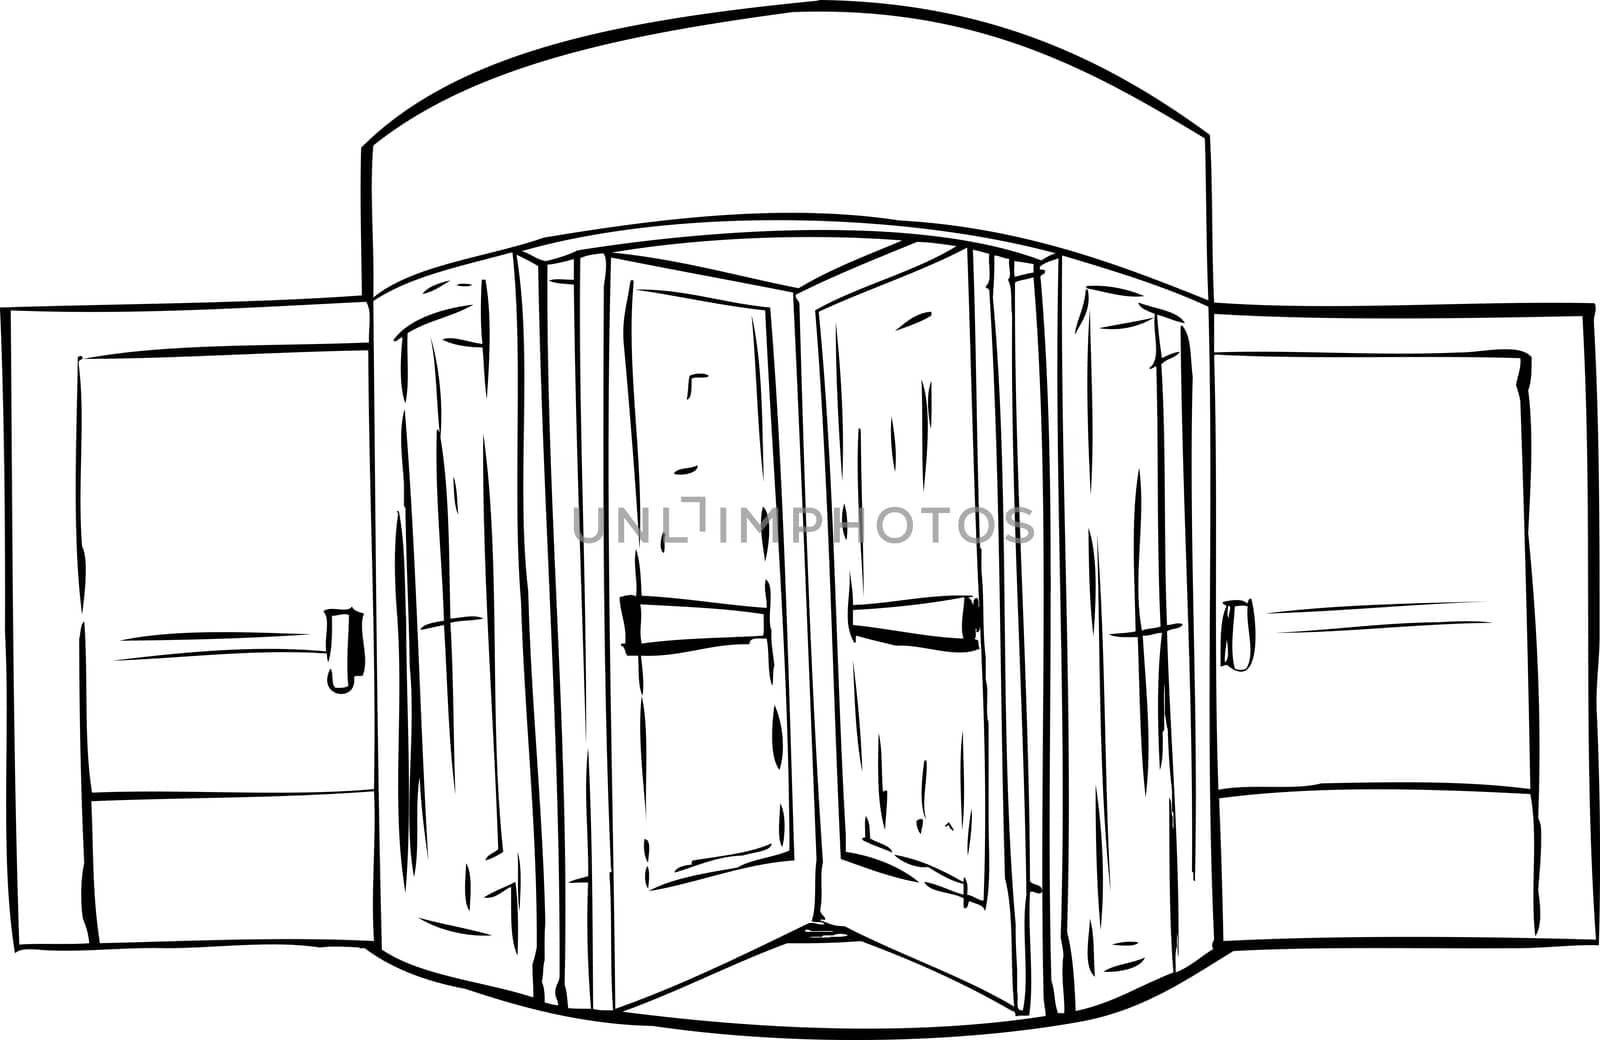 Outlined Revolving Door Background by TheBlackRhino